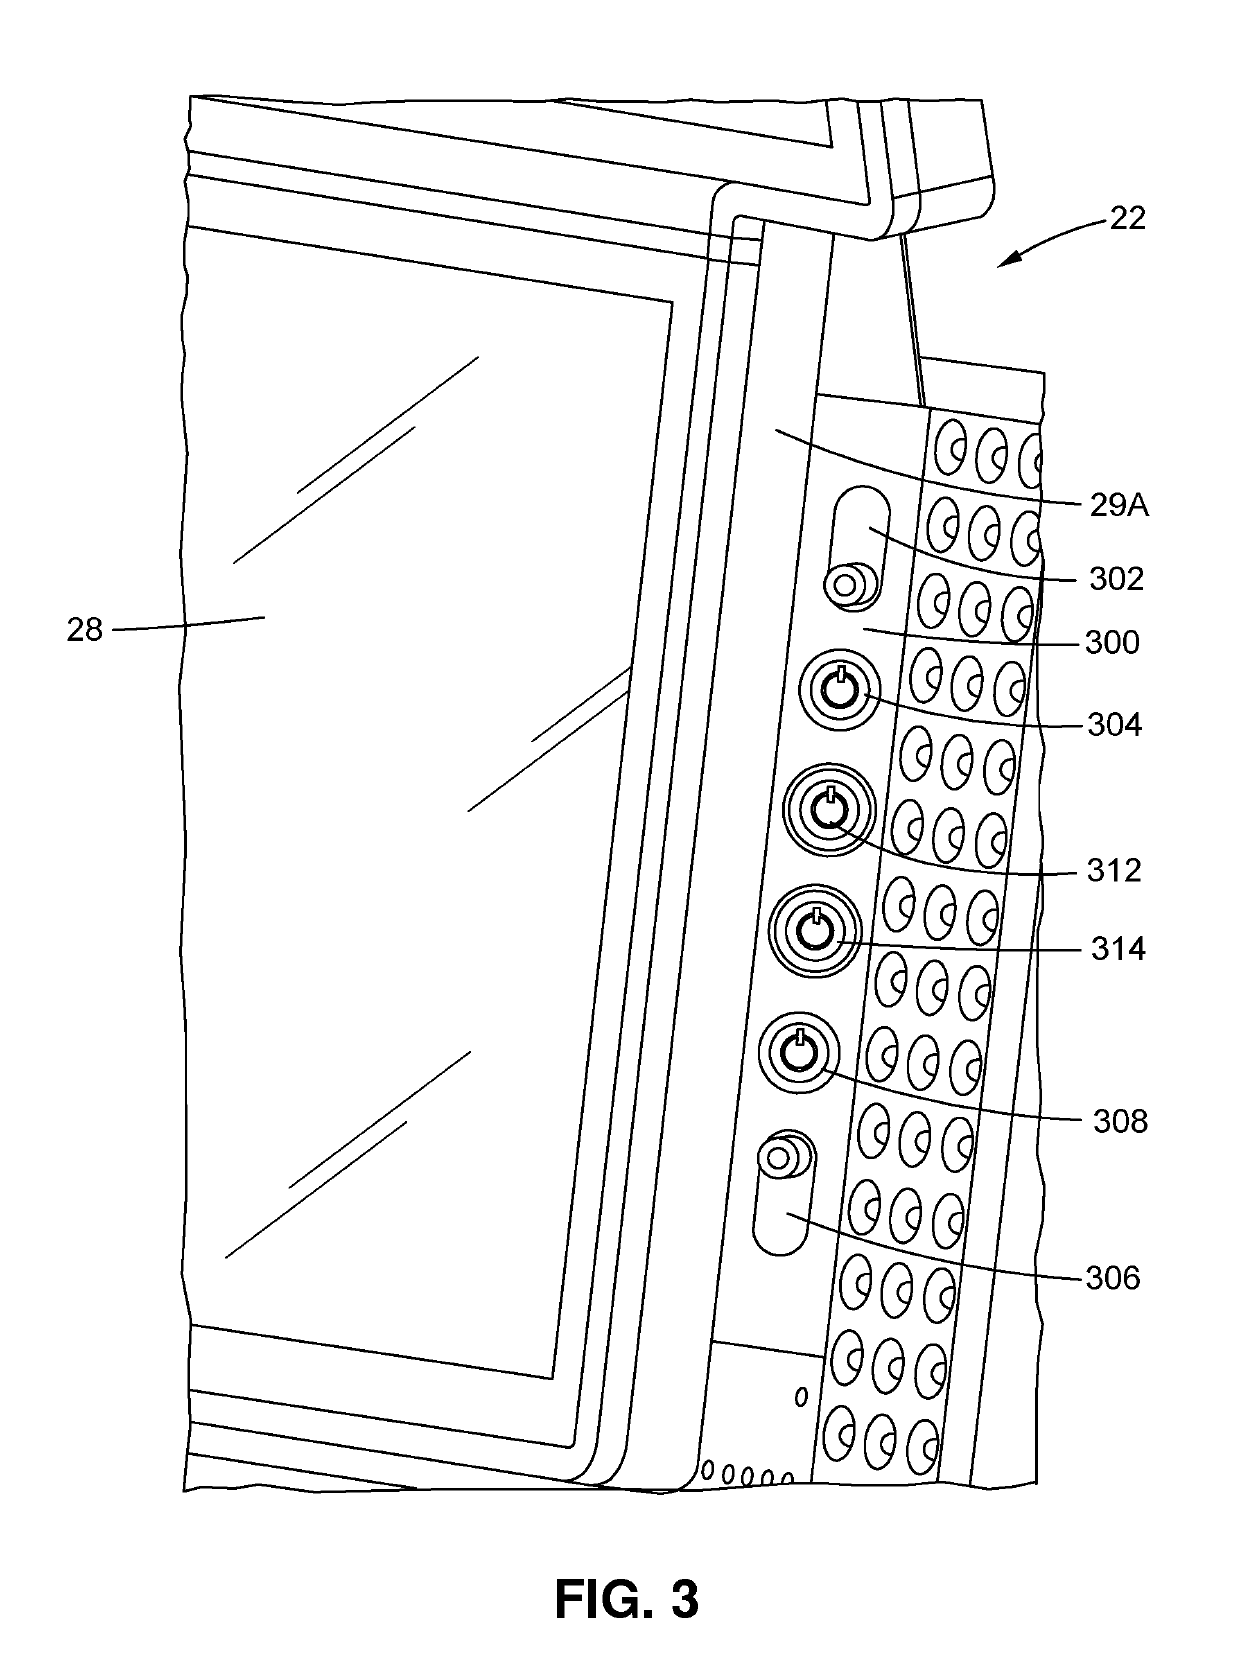 Component mounting configurations for a gaming machine cabinet